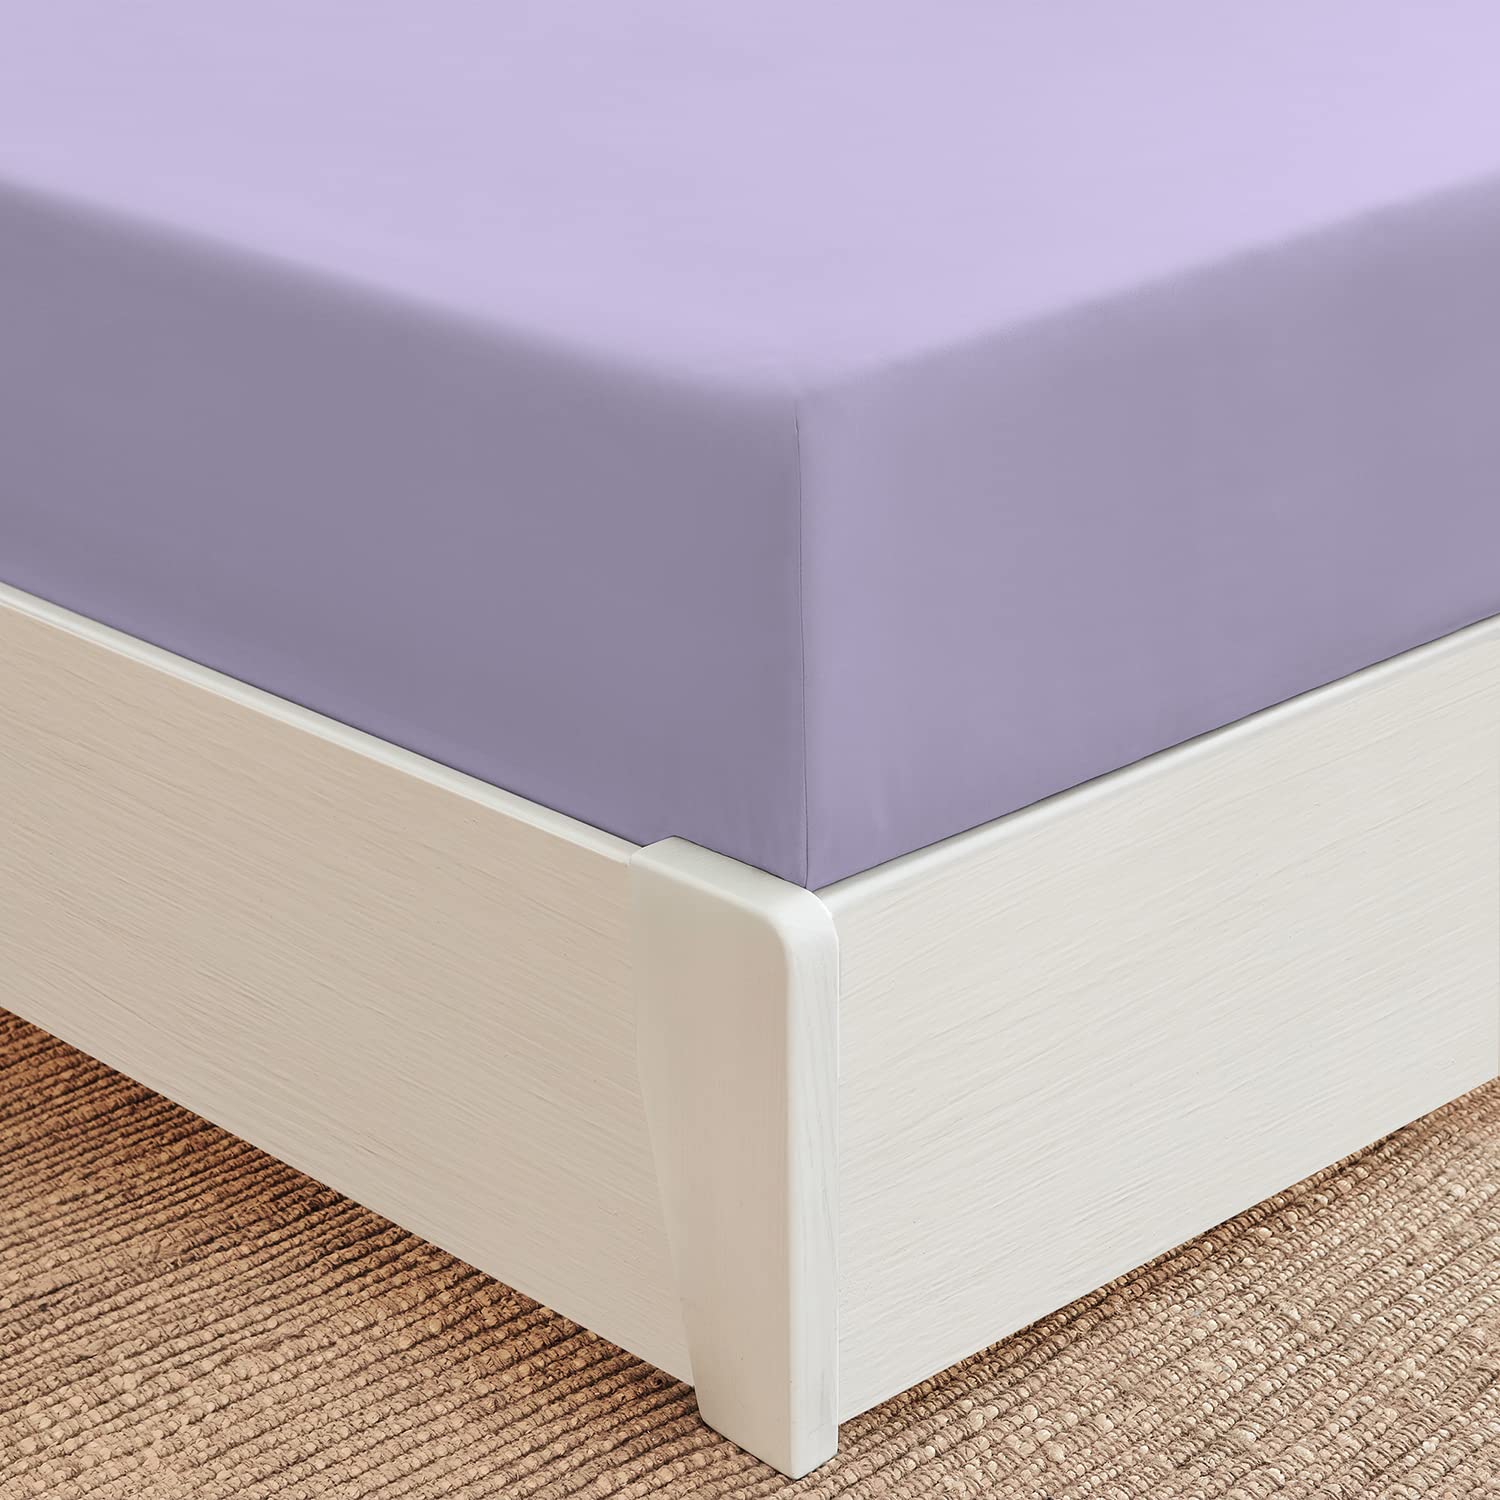 Book Cover Mellanni Queen Fitted Sheet Only - Iconic Collection Bedding Sheets - Soft & Cooling Sheets with up to 16 inch Deep Pocket - All Around Elastic - Wrinkle, Fade, Stain Resistant - 1 PC (Queen, Violet) Queen Violet